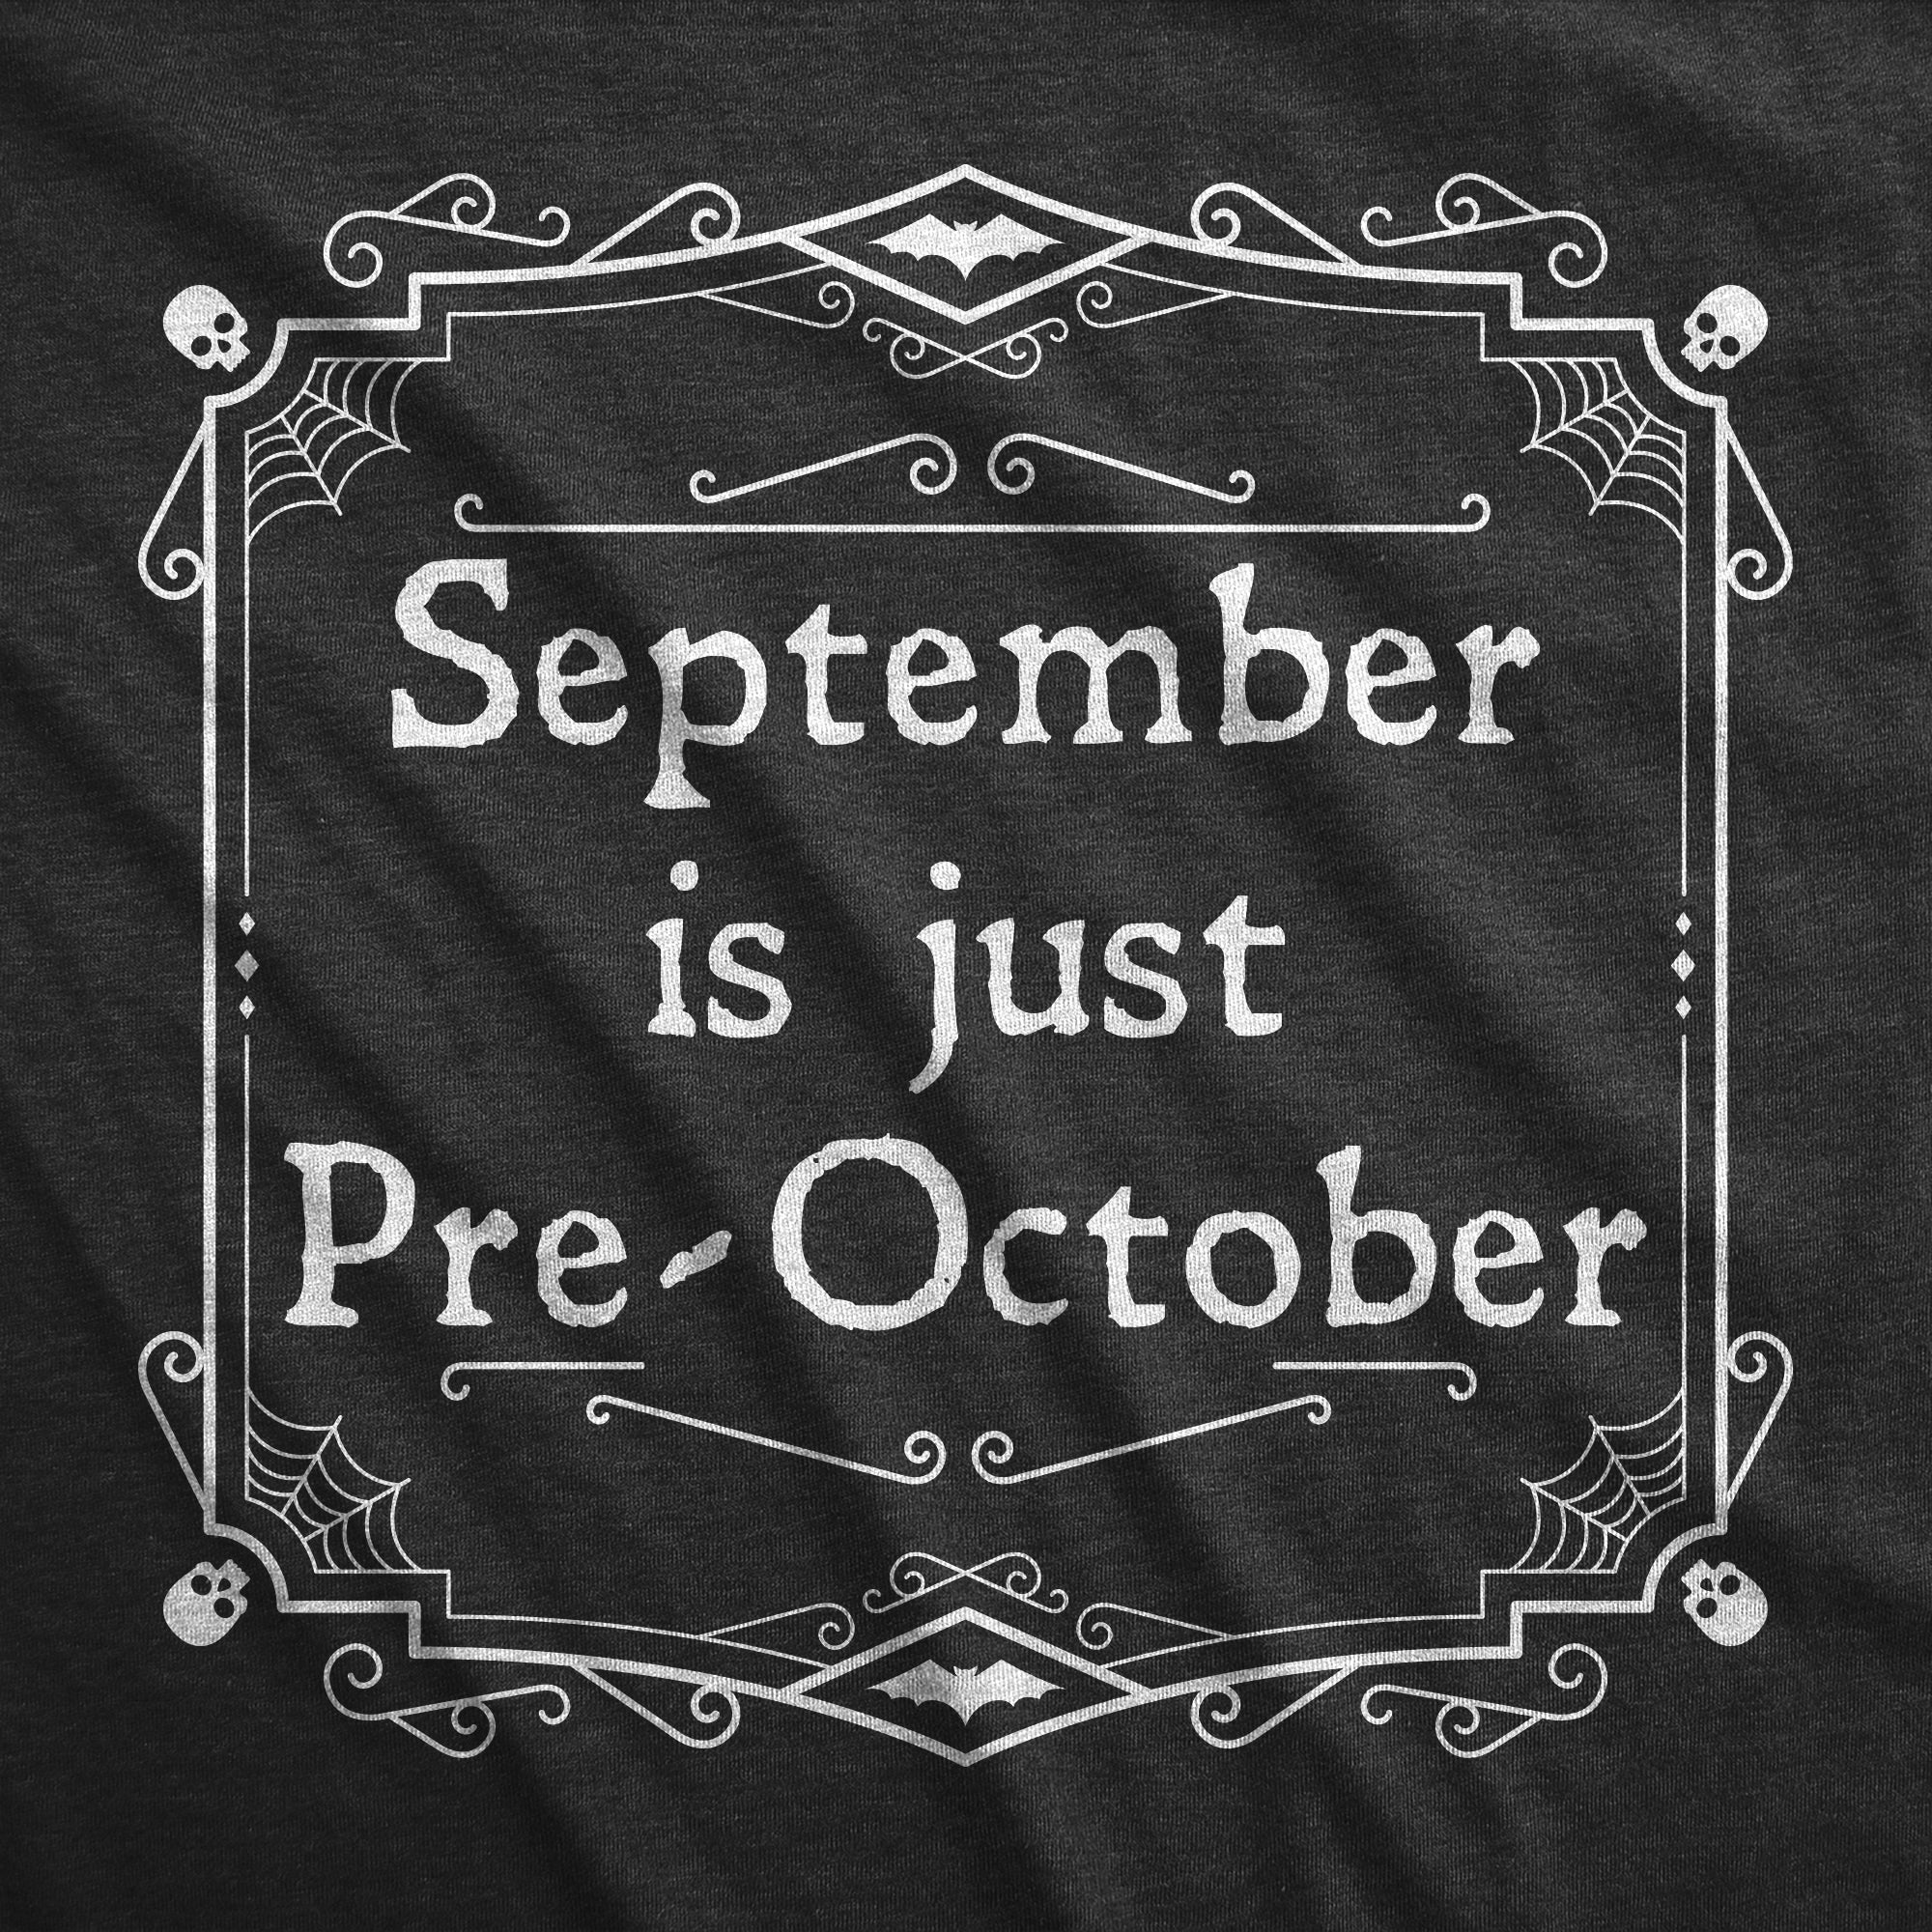 Funny Heather Black - OCTOBER September Is Just Pre October Womens T Shirt Nerdy Halloween Tee